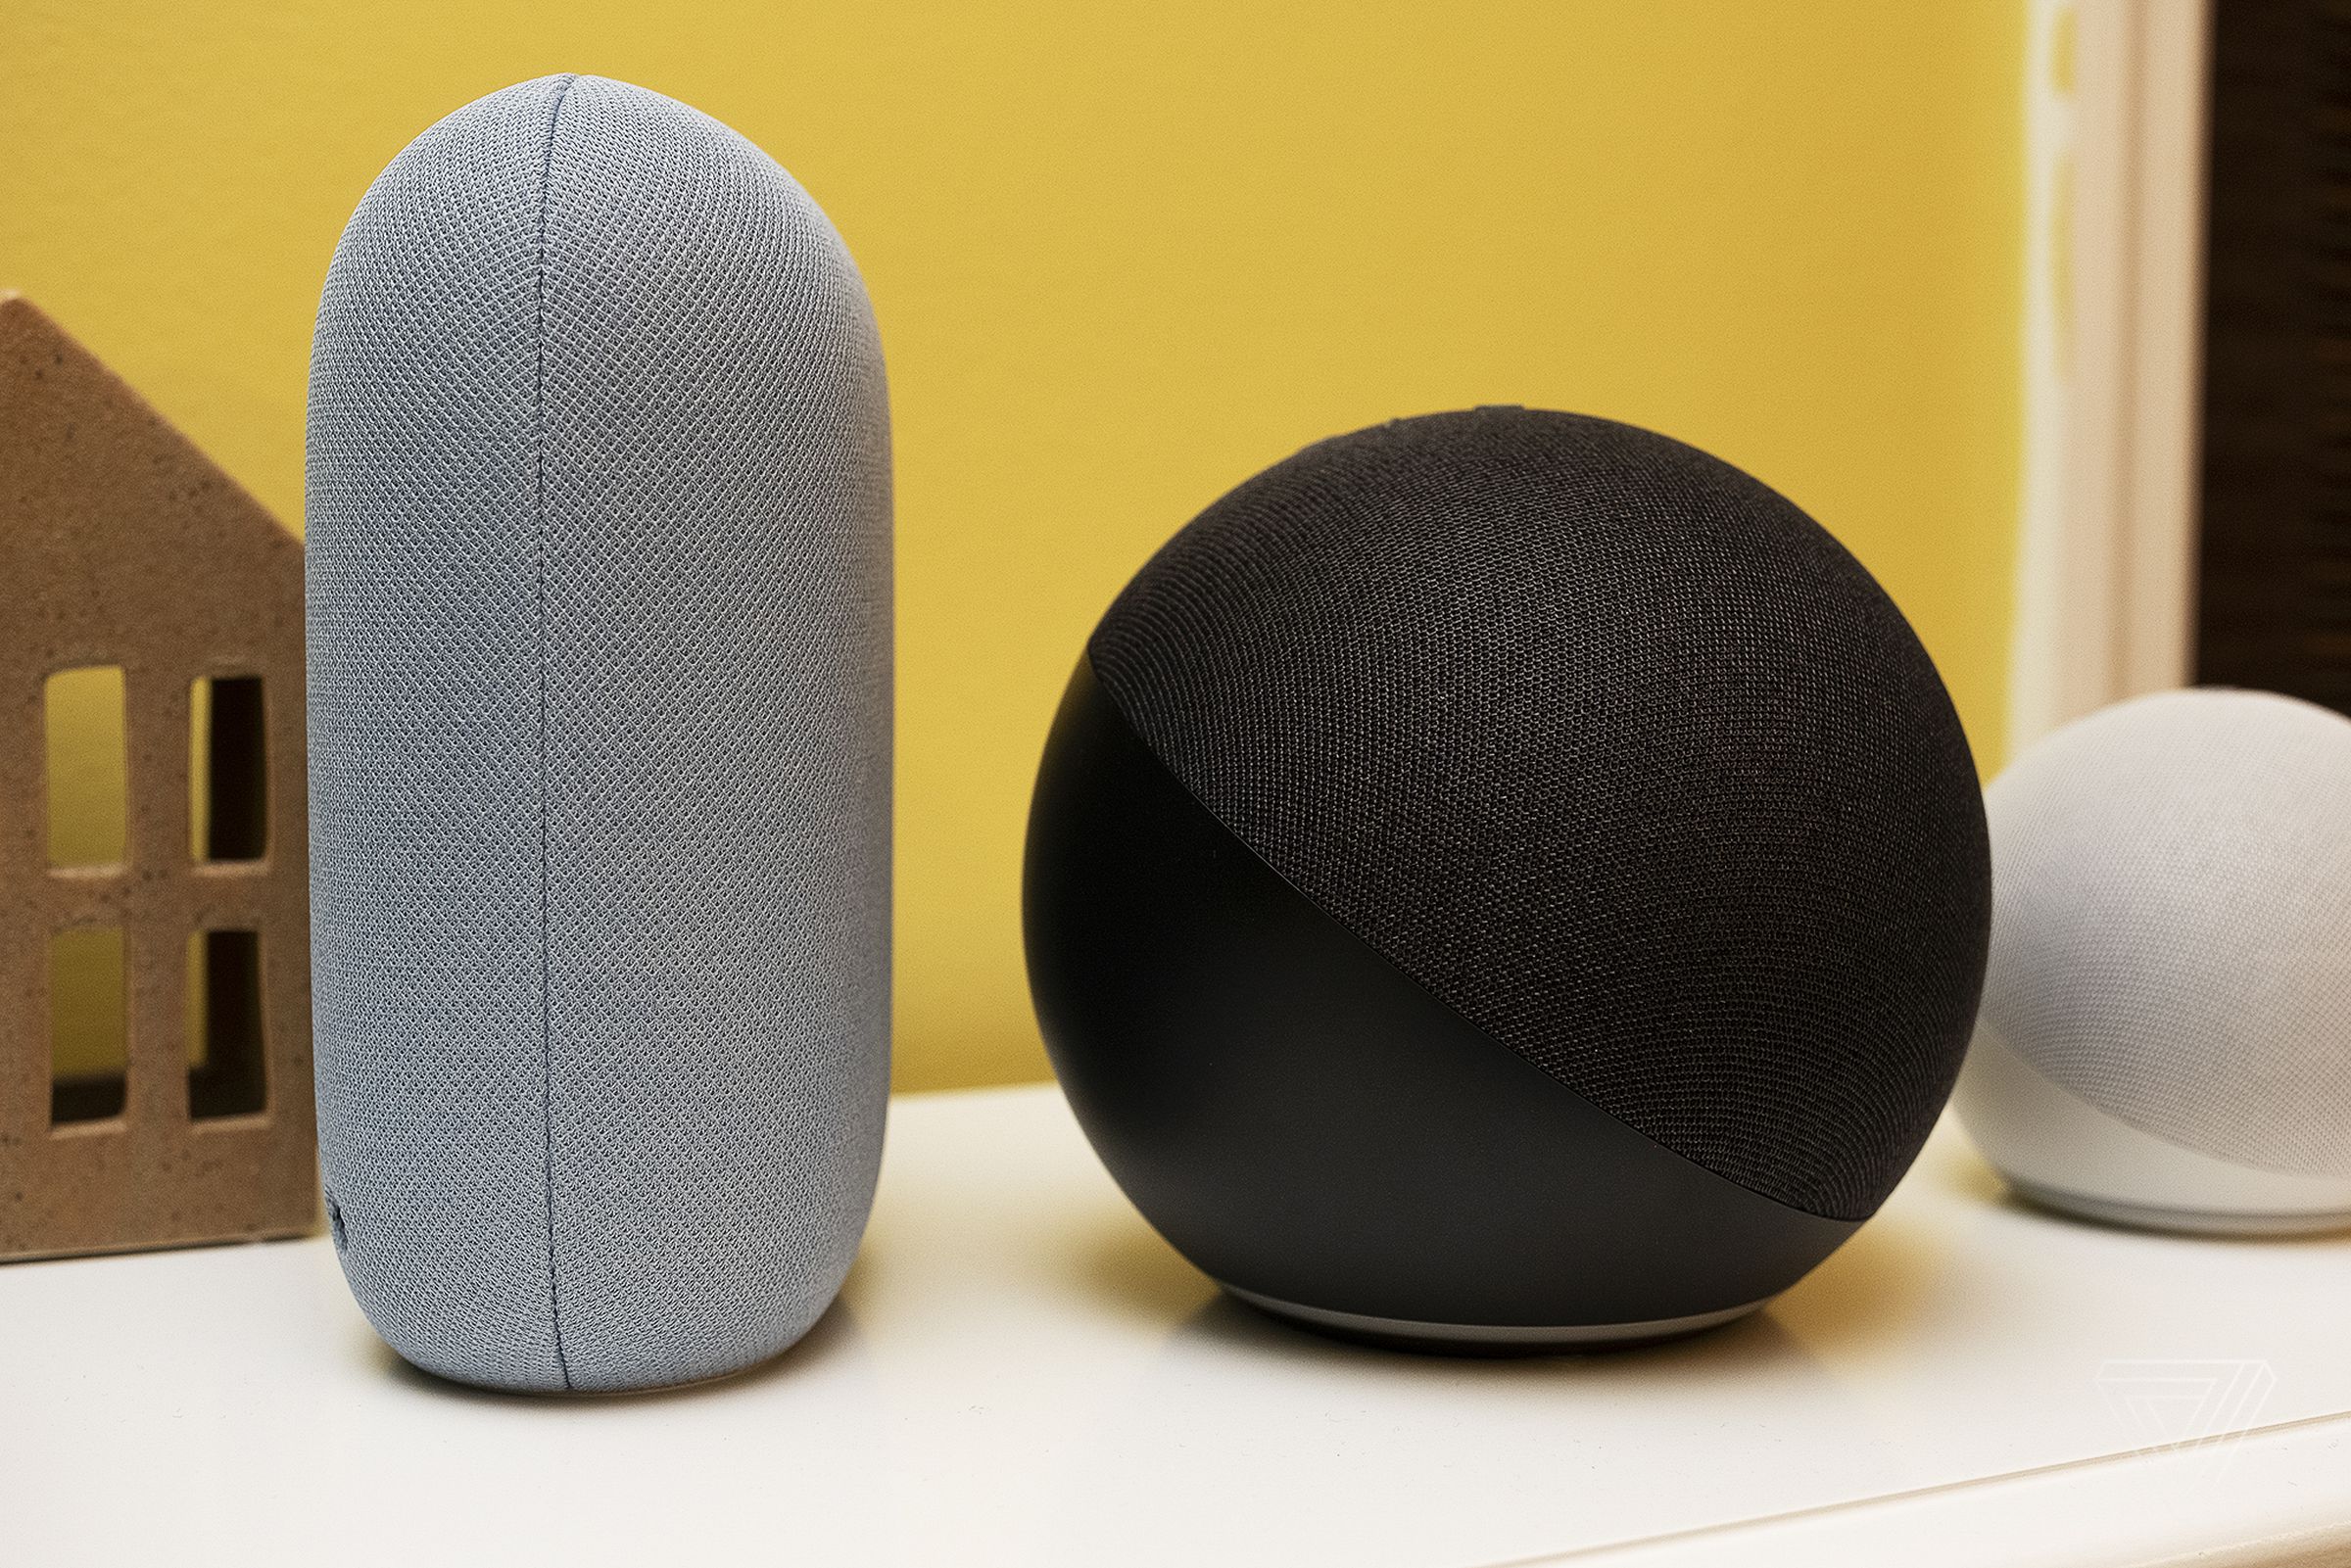 From the side, you can see how much deeper the Echo is compared to the Nest Audio